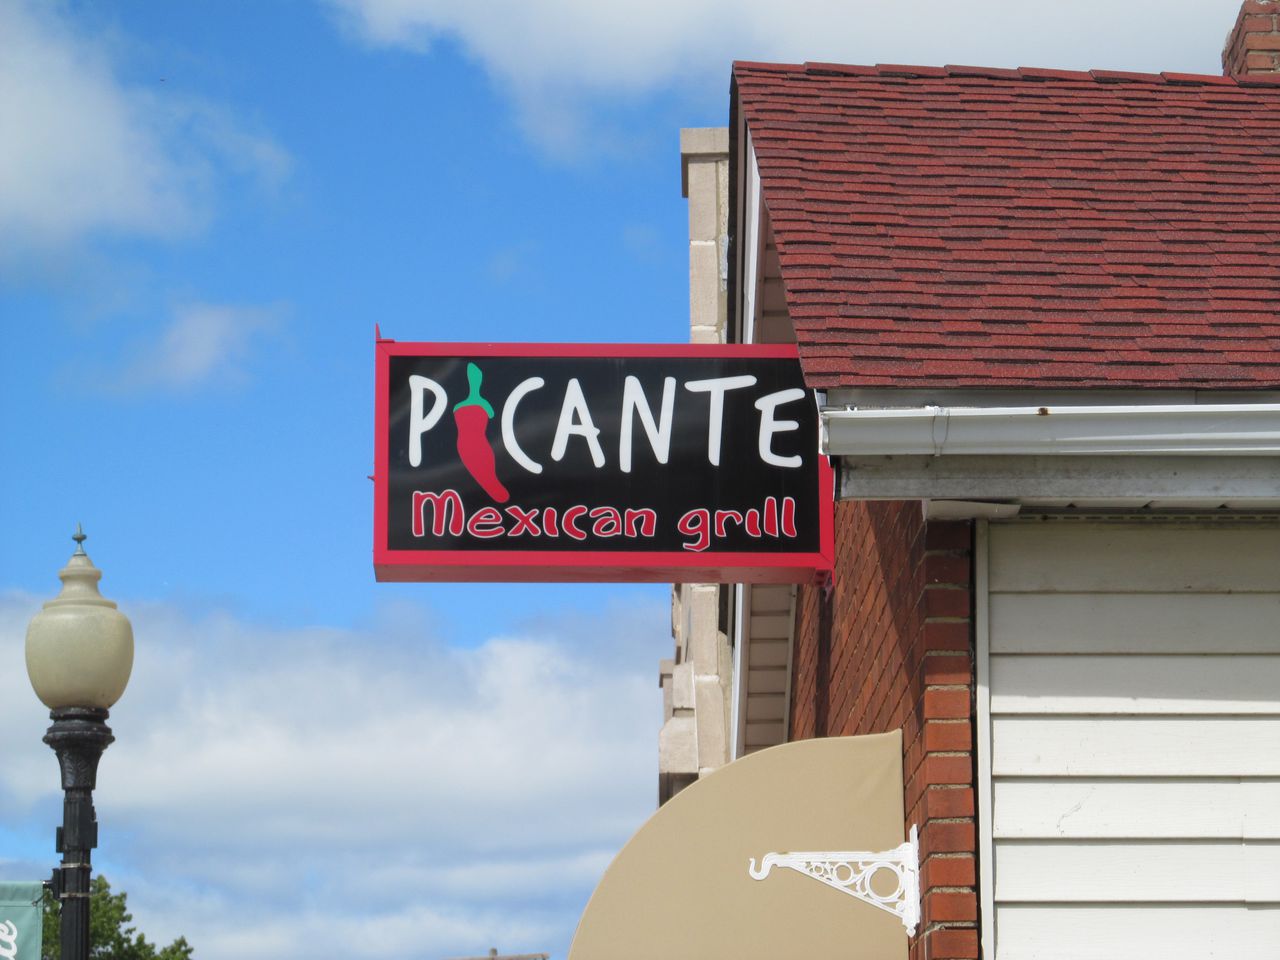 Picante Mexican Grill in Painesville